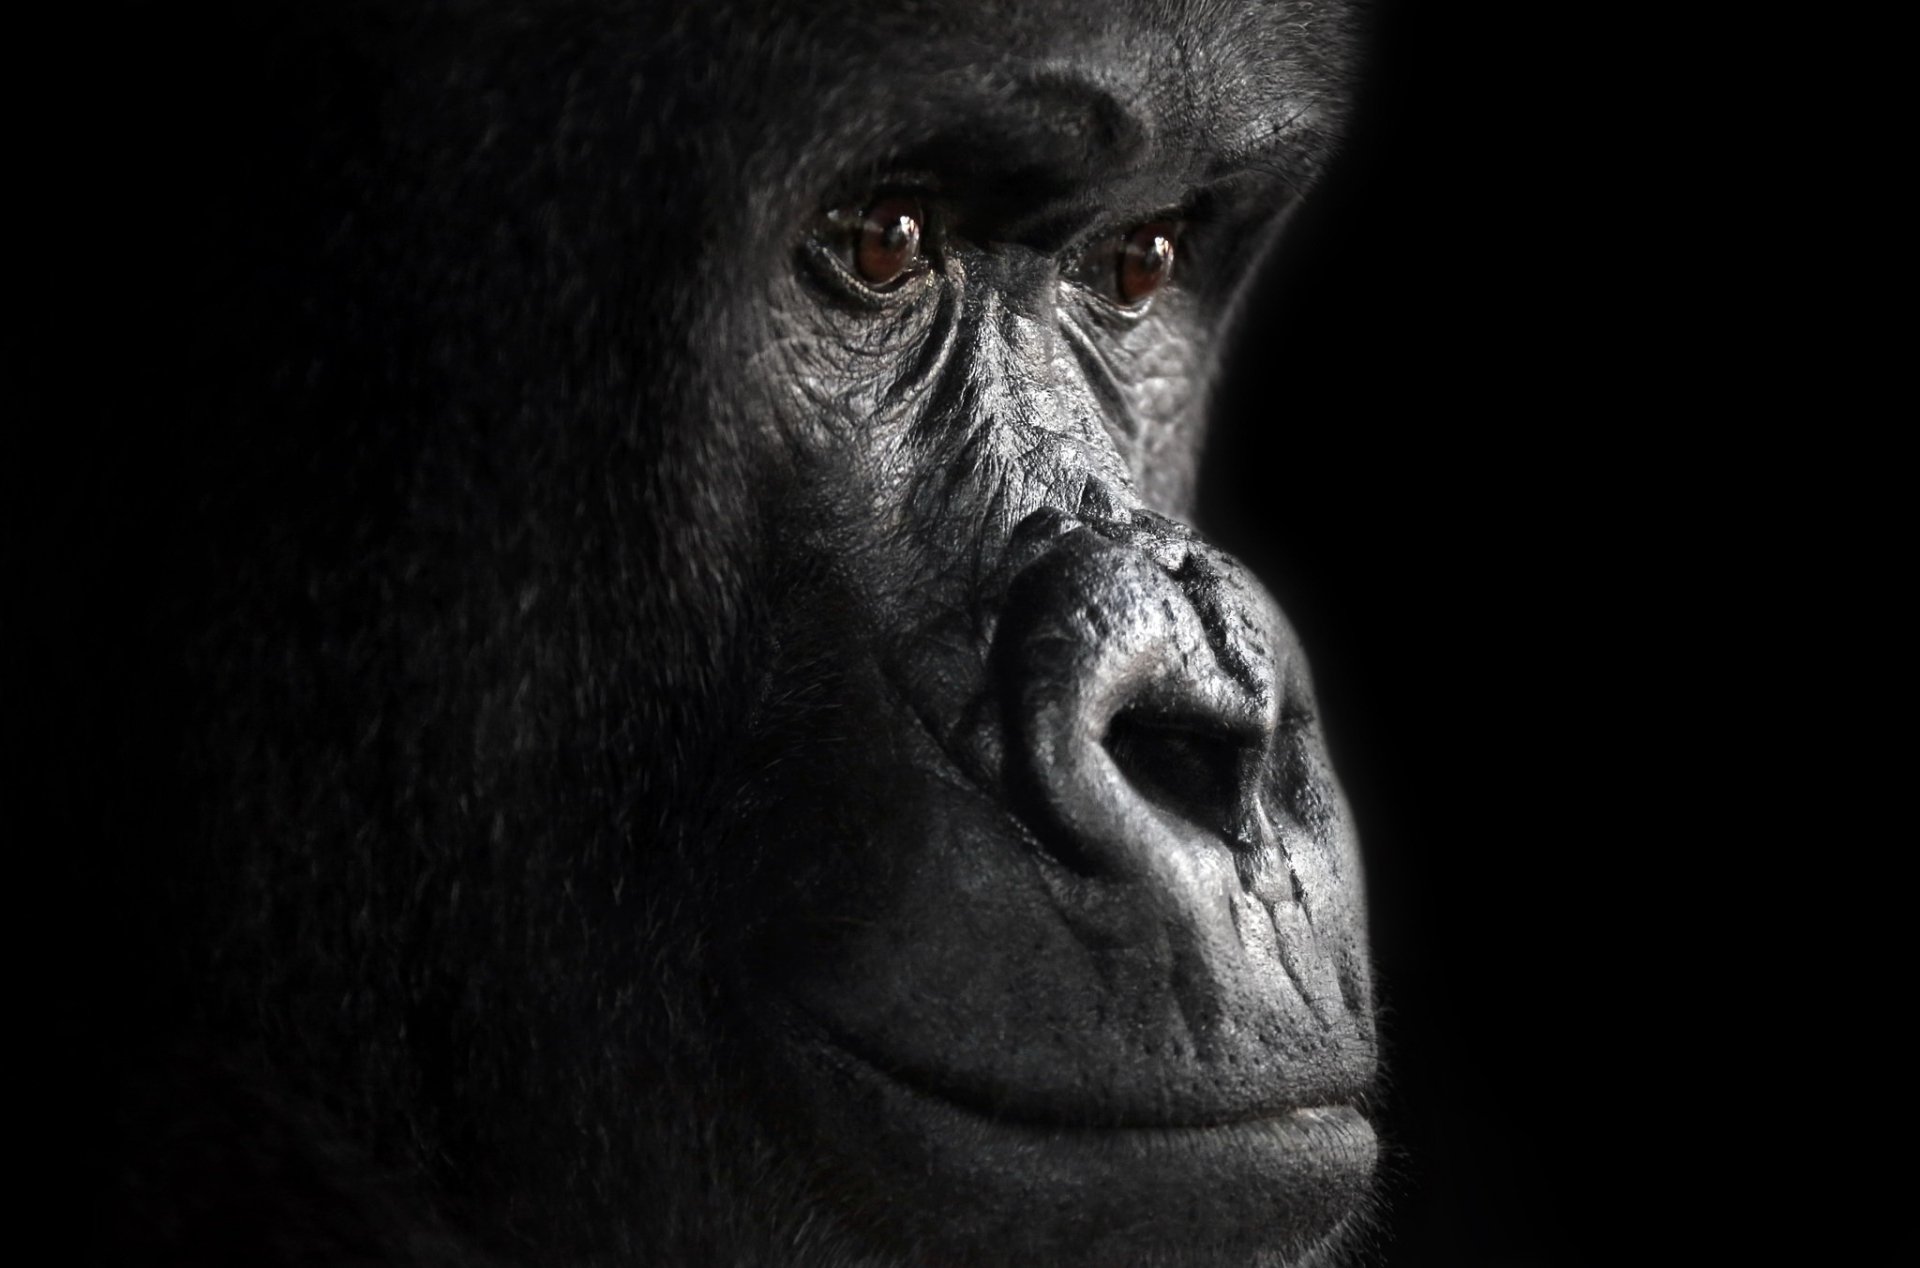 Attractive Zoom Backgrounds Free Gorilla Wallpaper Images Images And